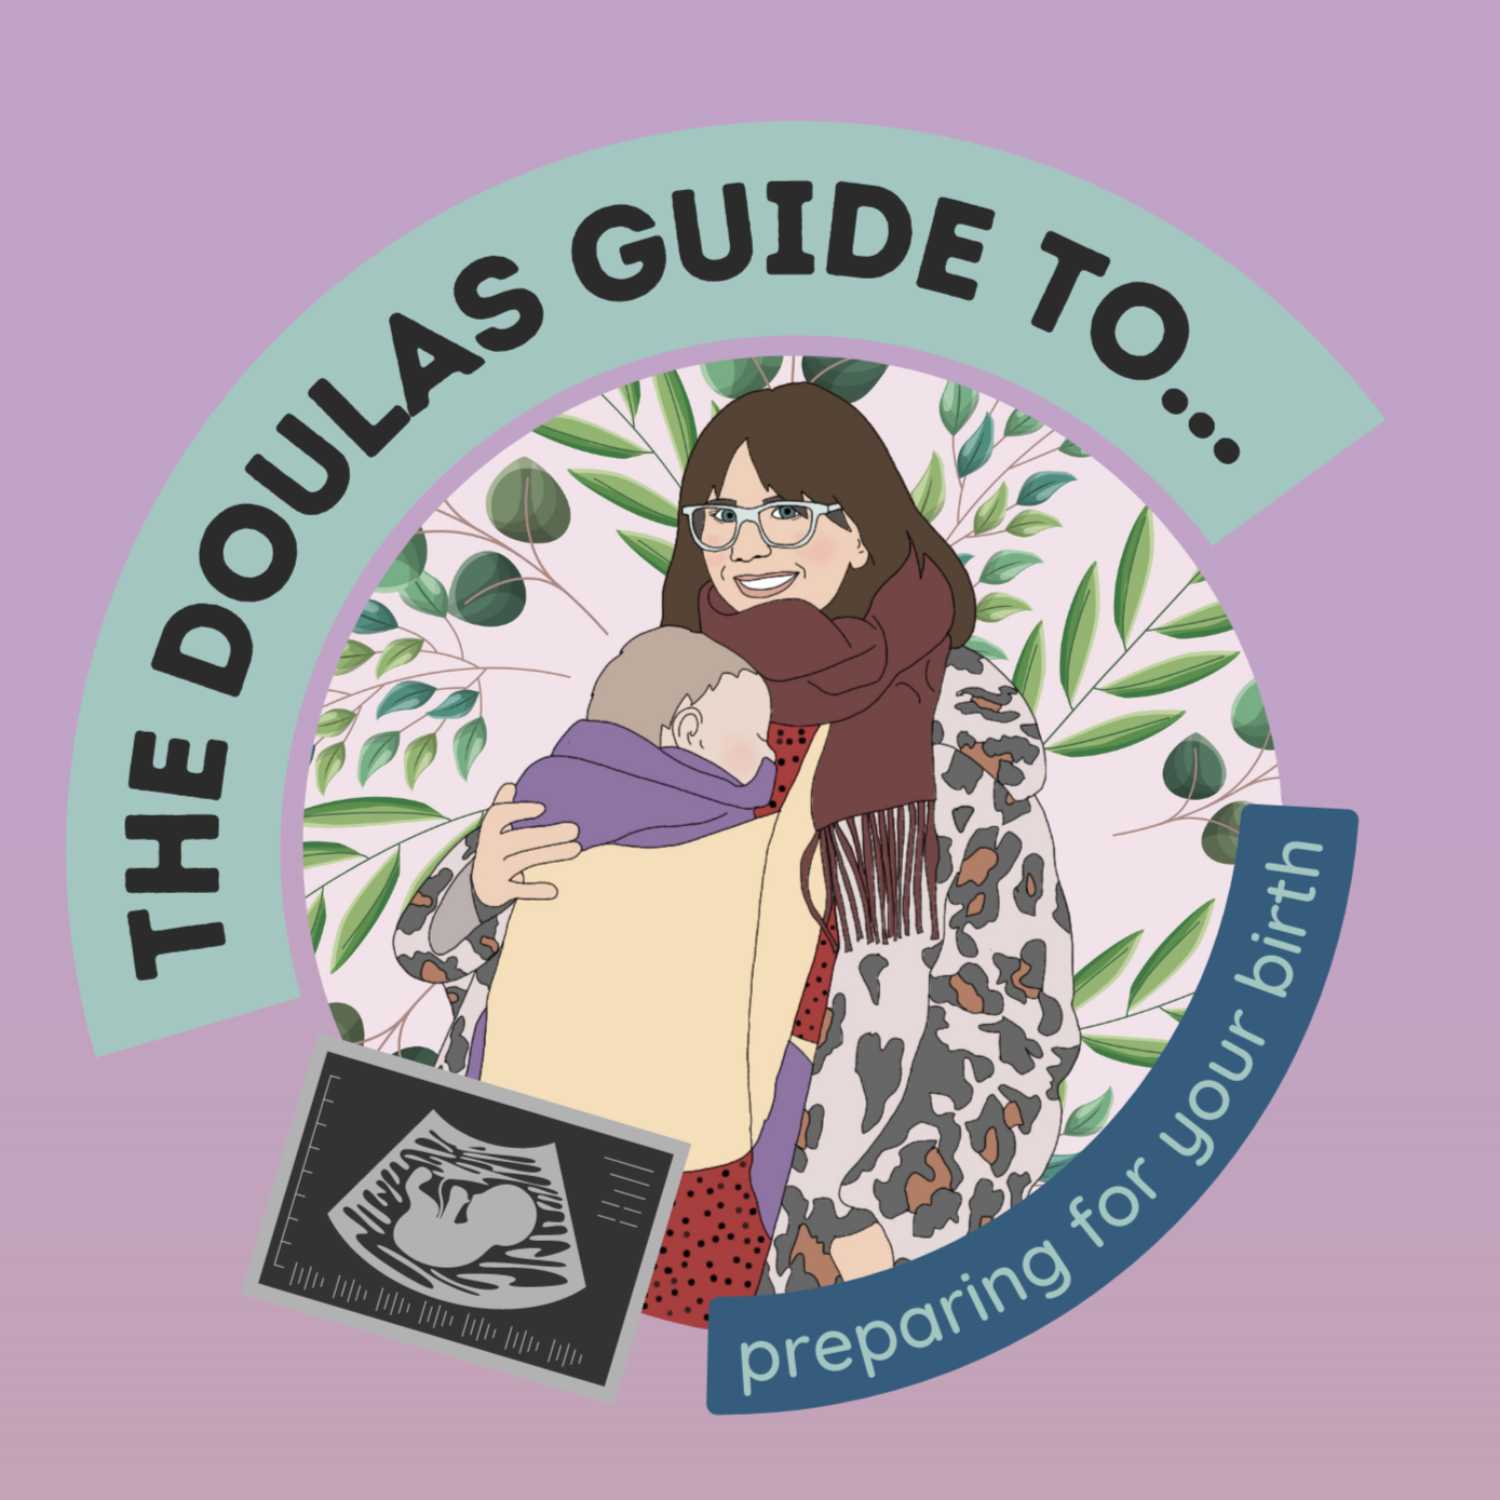 S1 EP 30: The Doula's Guide To... Preparing For Your Birth (exciting announcement!)